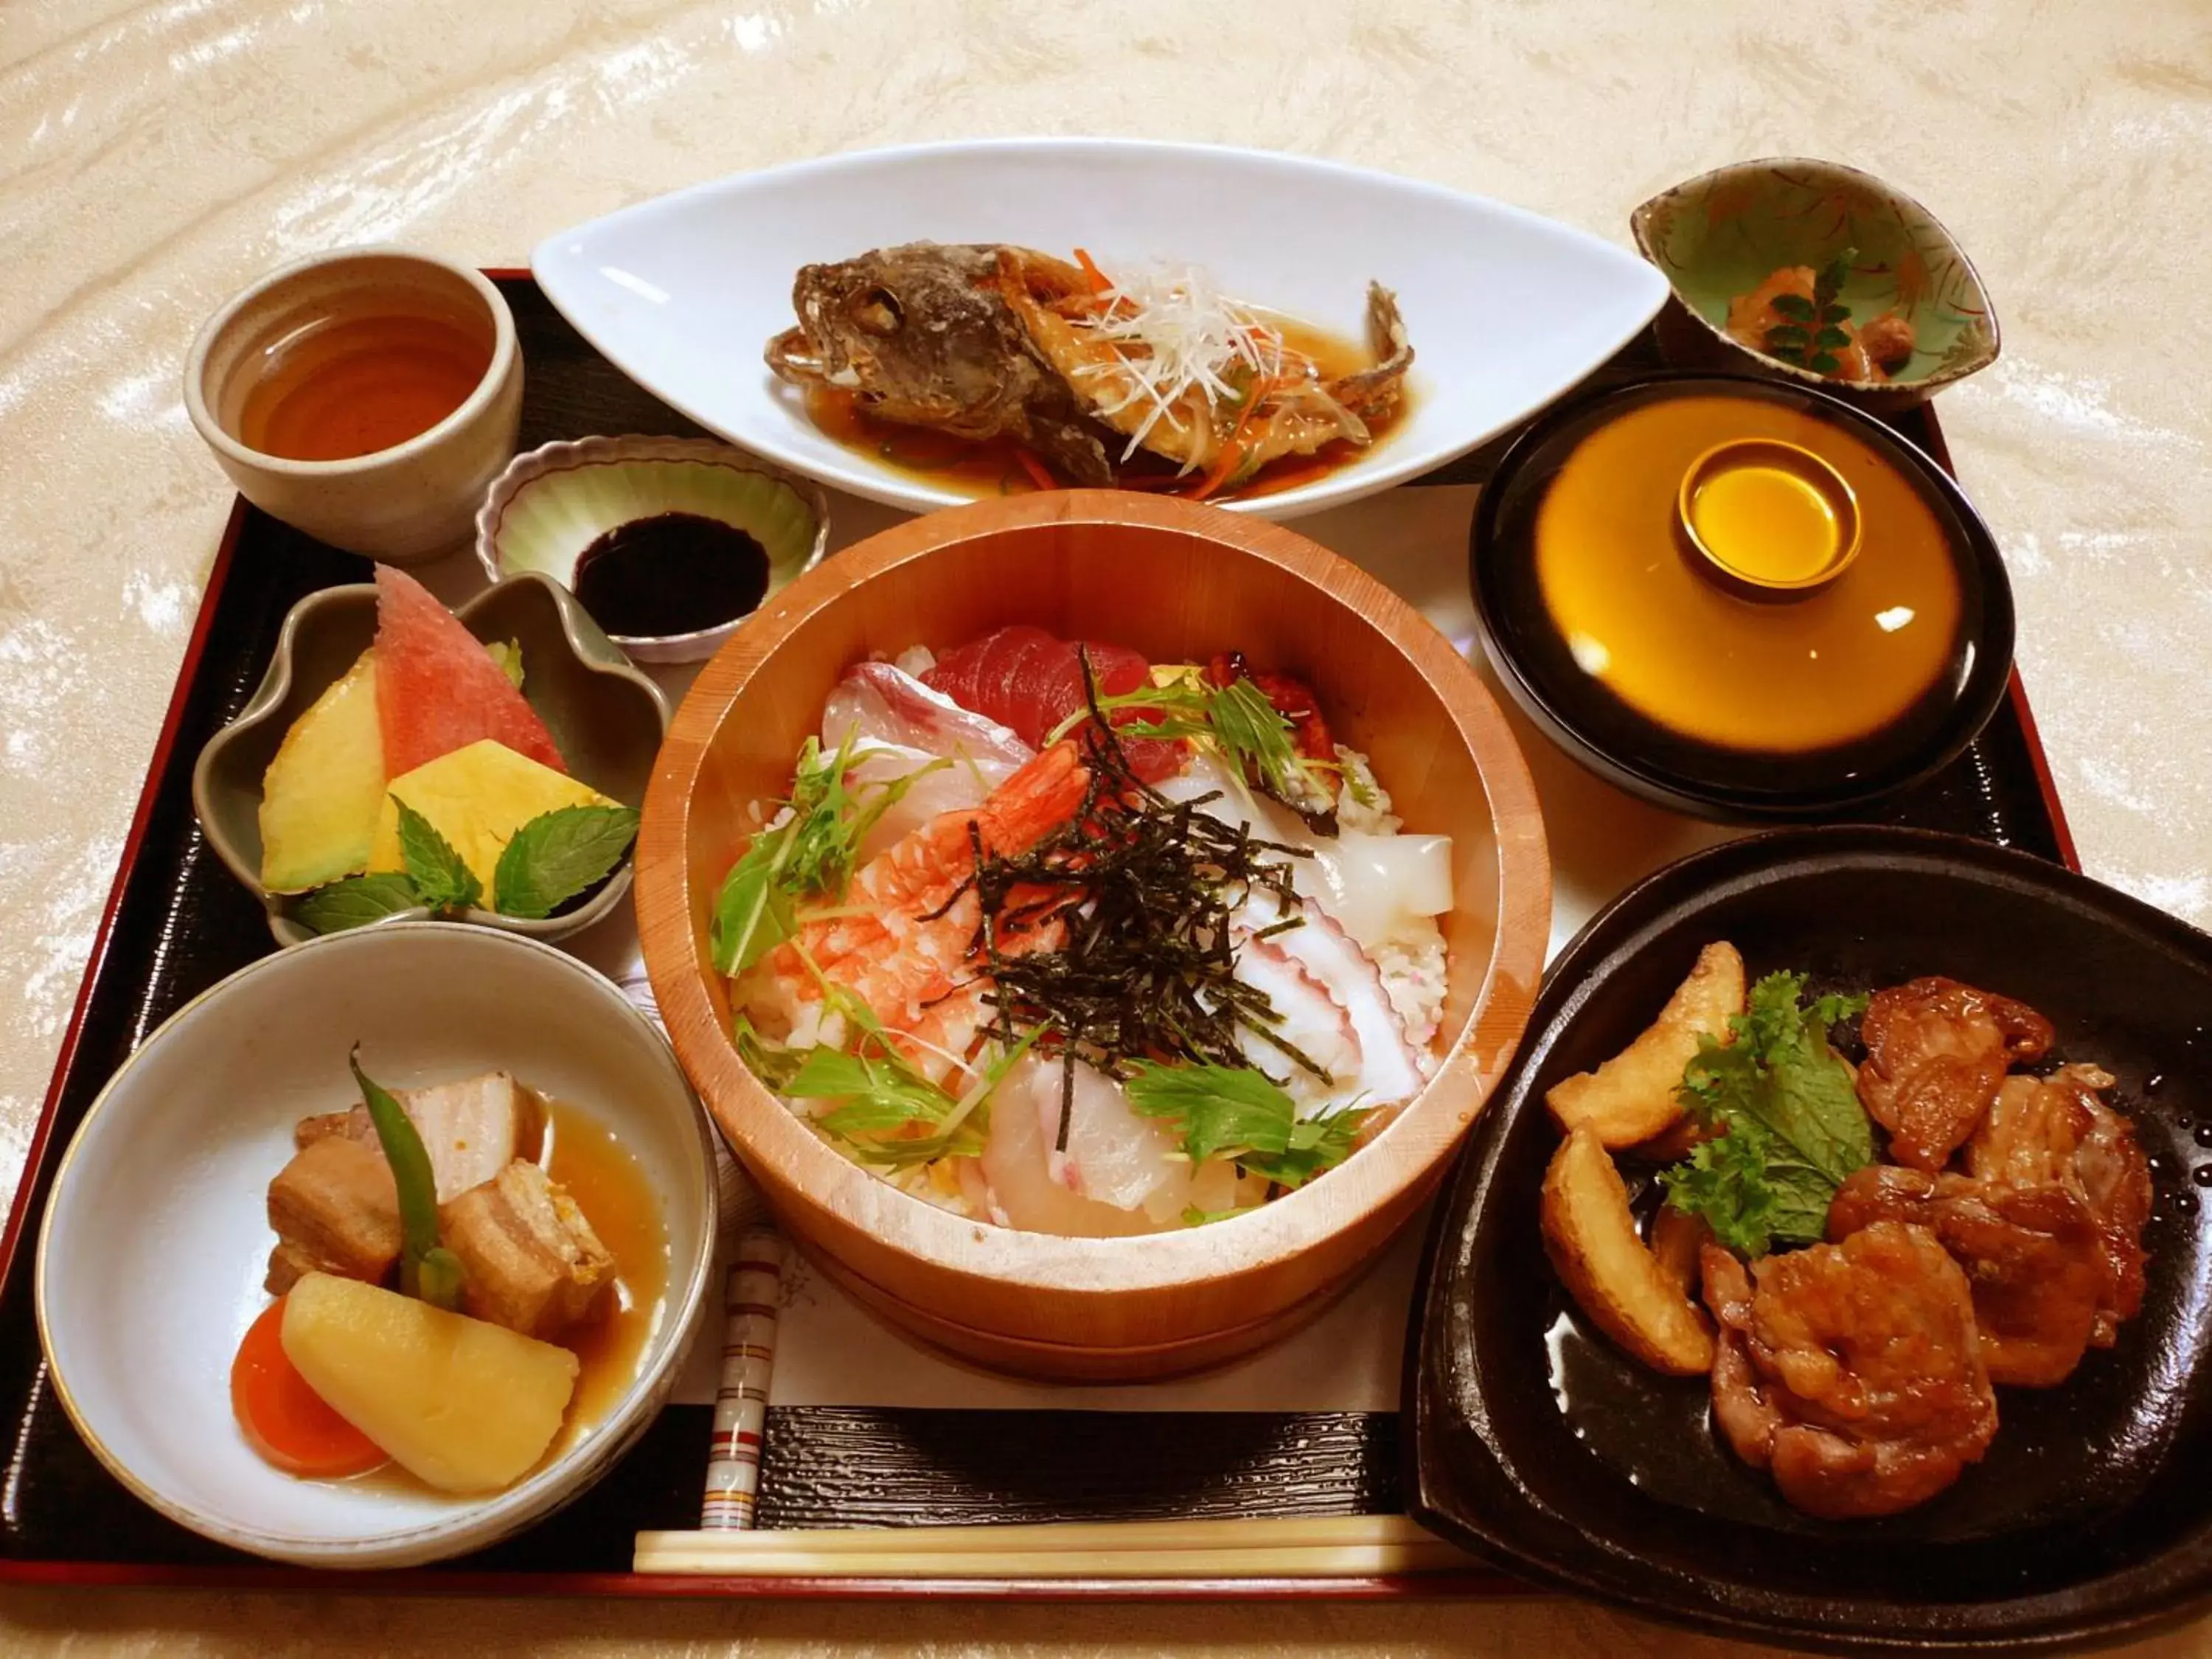 Food, Lunch and Dinner in Hotel Sunroute Matsuyama